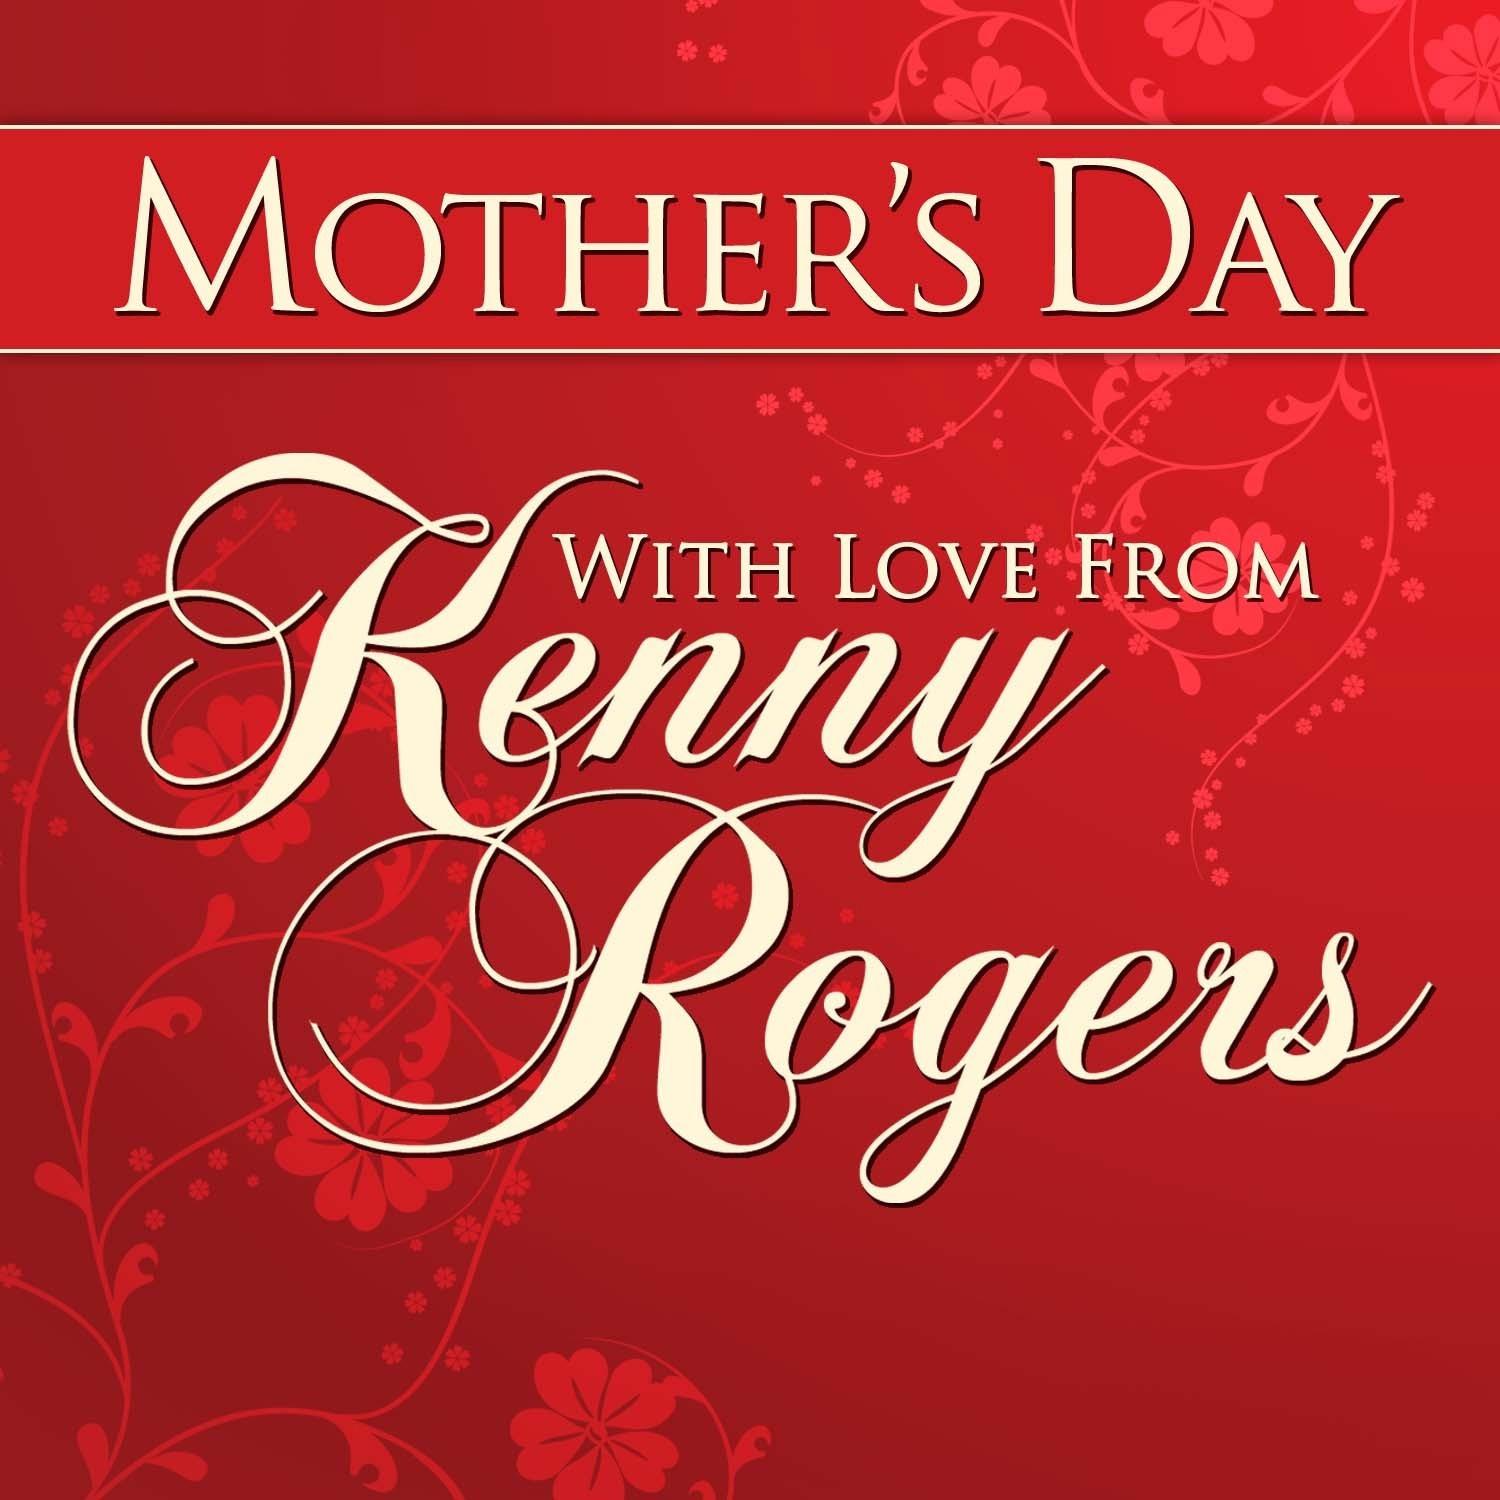 Mothers Day With Love From Kenny Rogers专辑